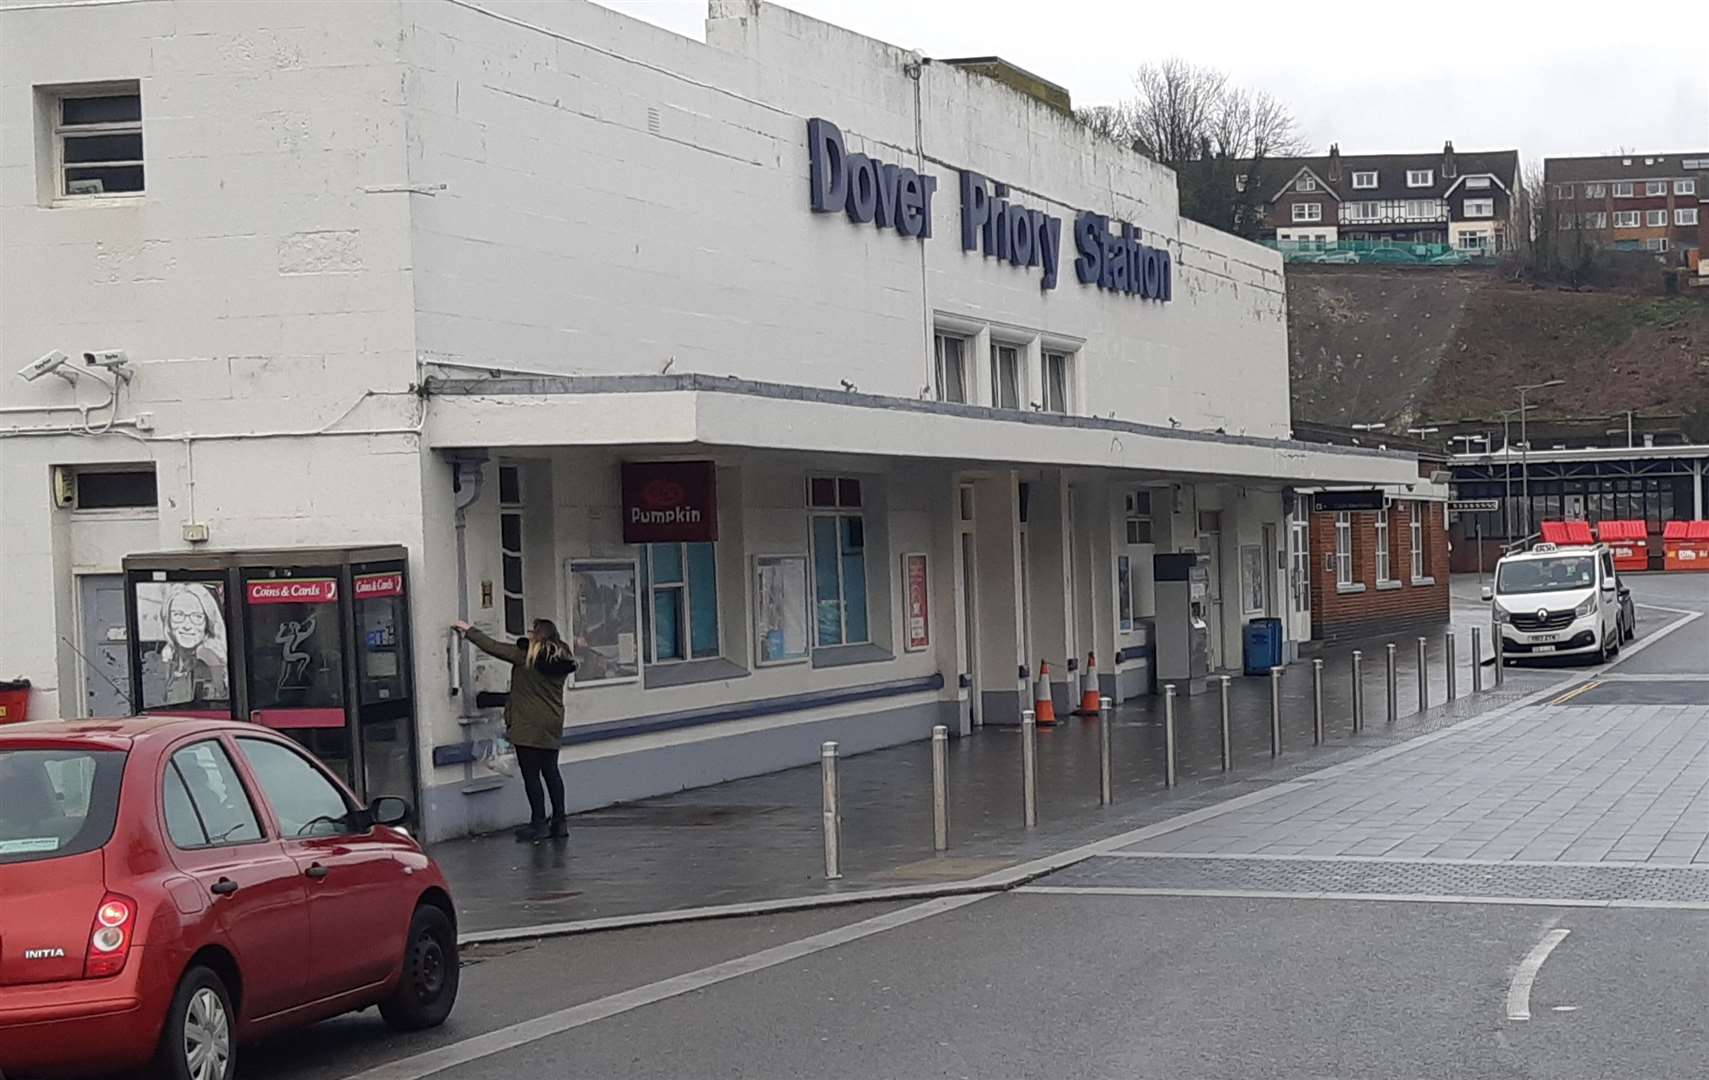 Trains from Dover Priory station will be affected